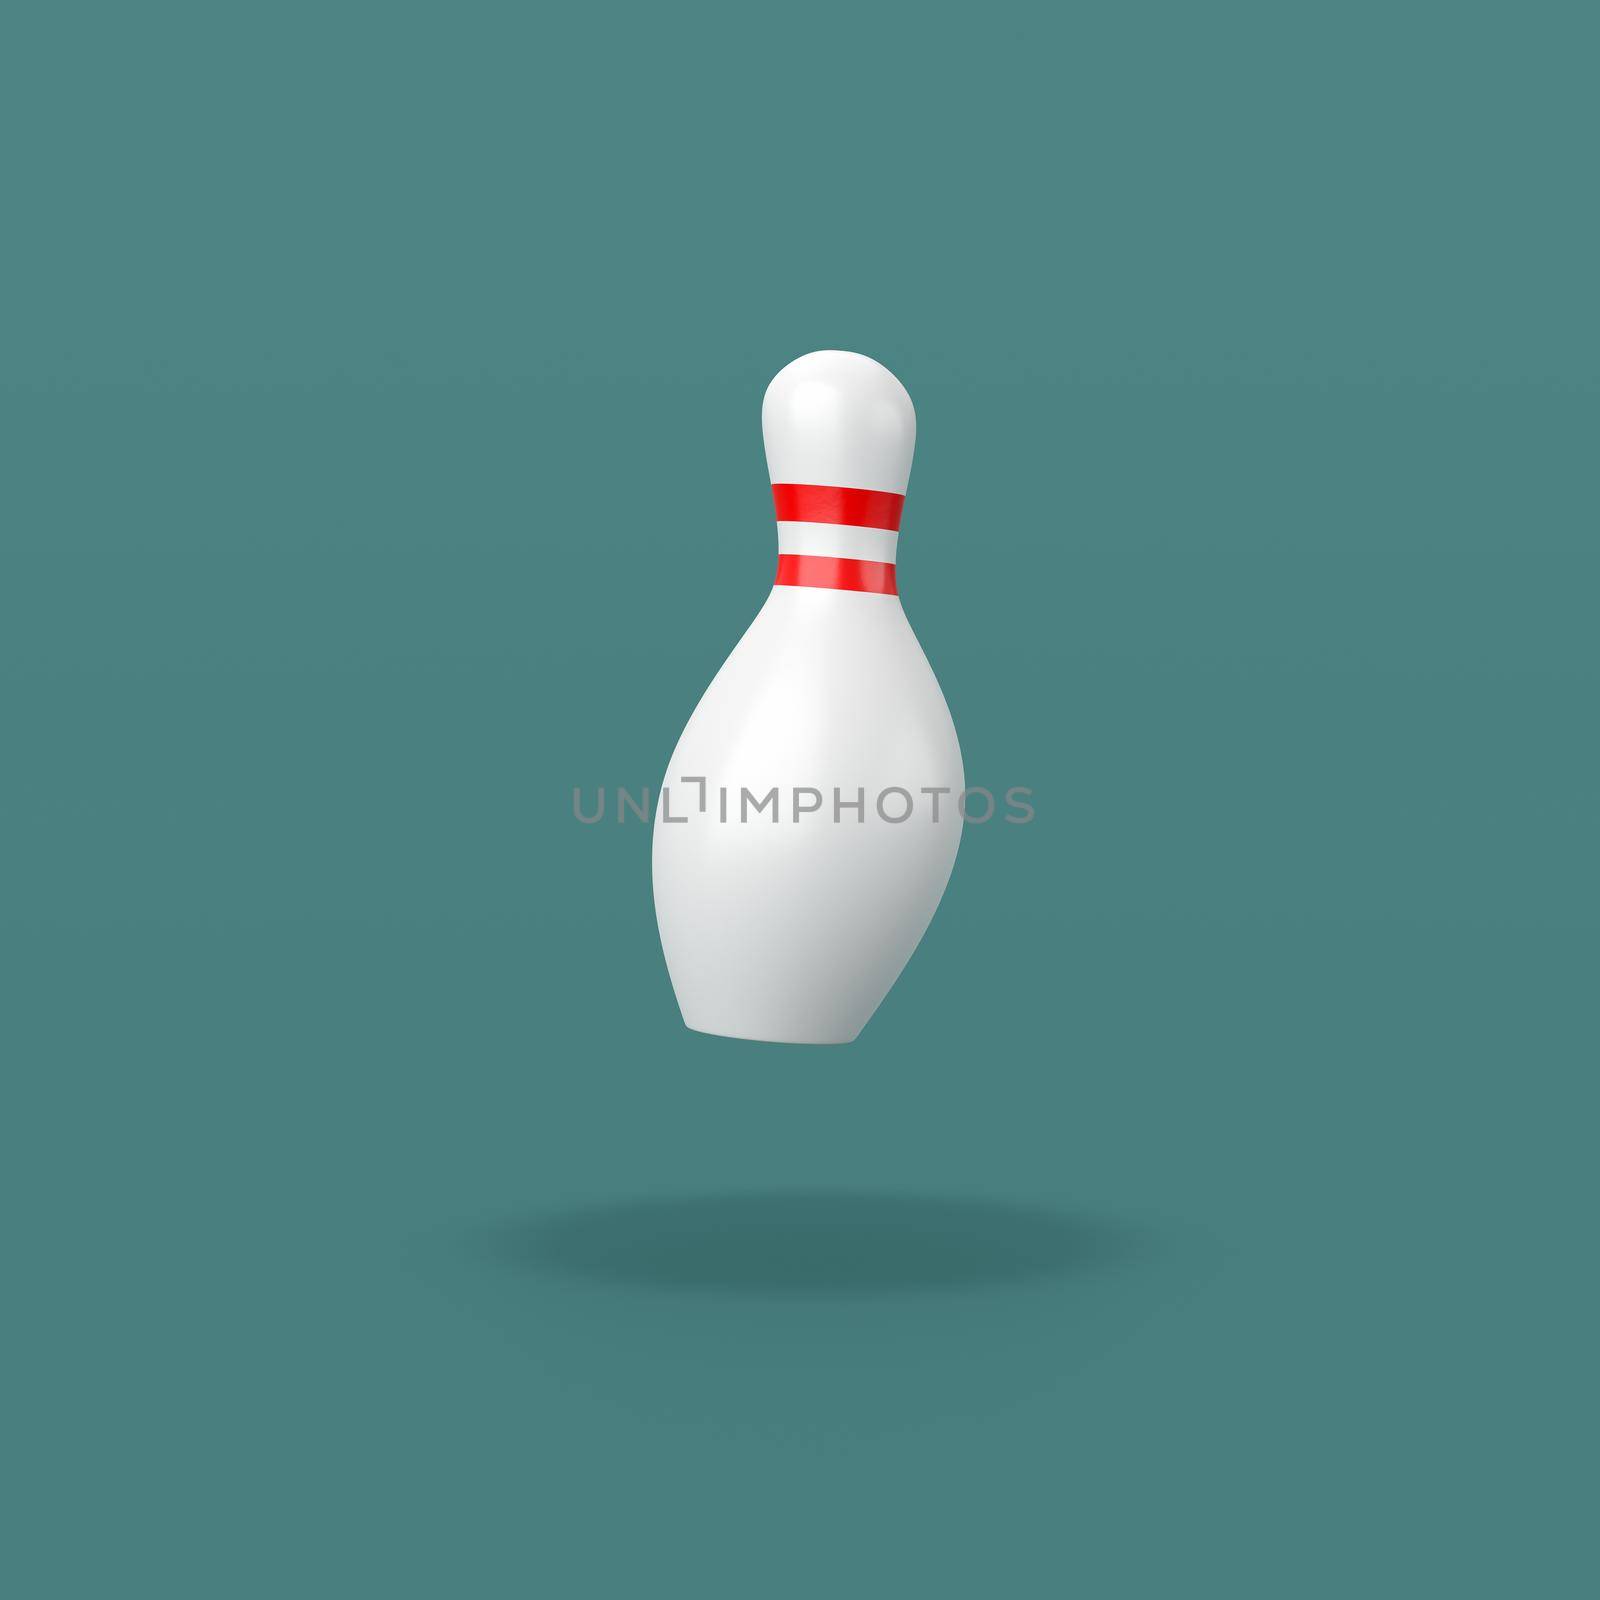 One Red and White Bowling Skittle Isolated on Flat Blue Background with Shadow 3D Illustration